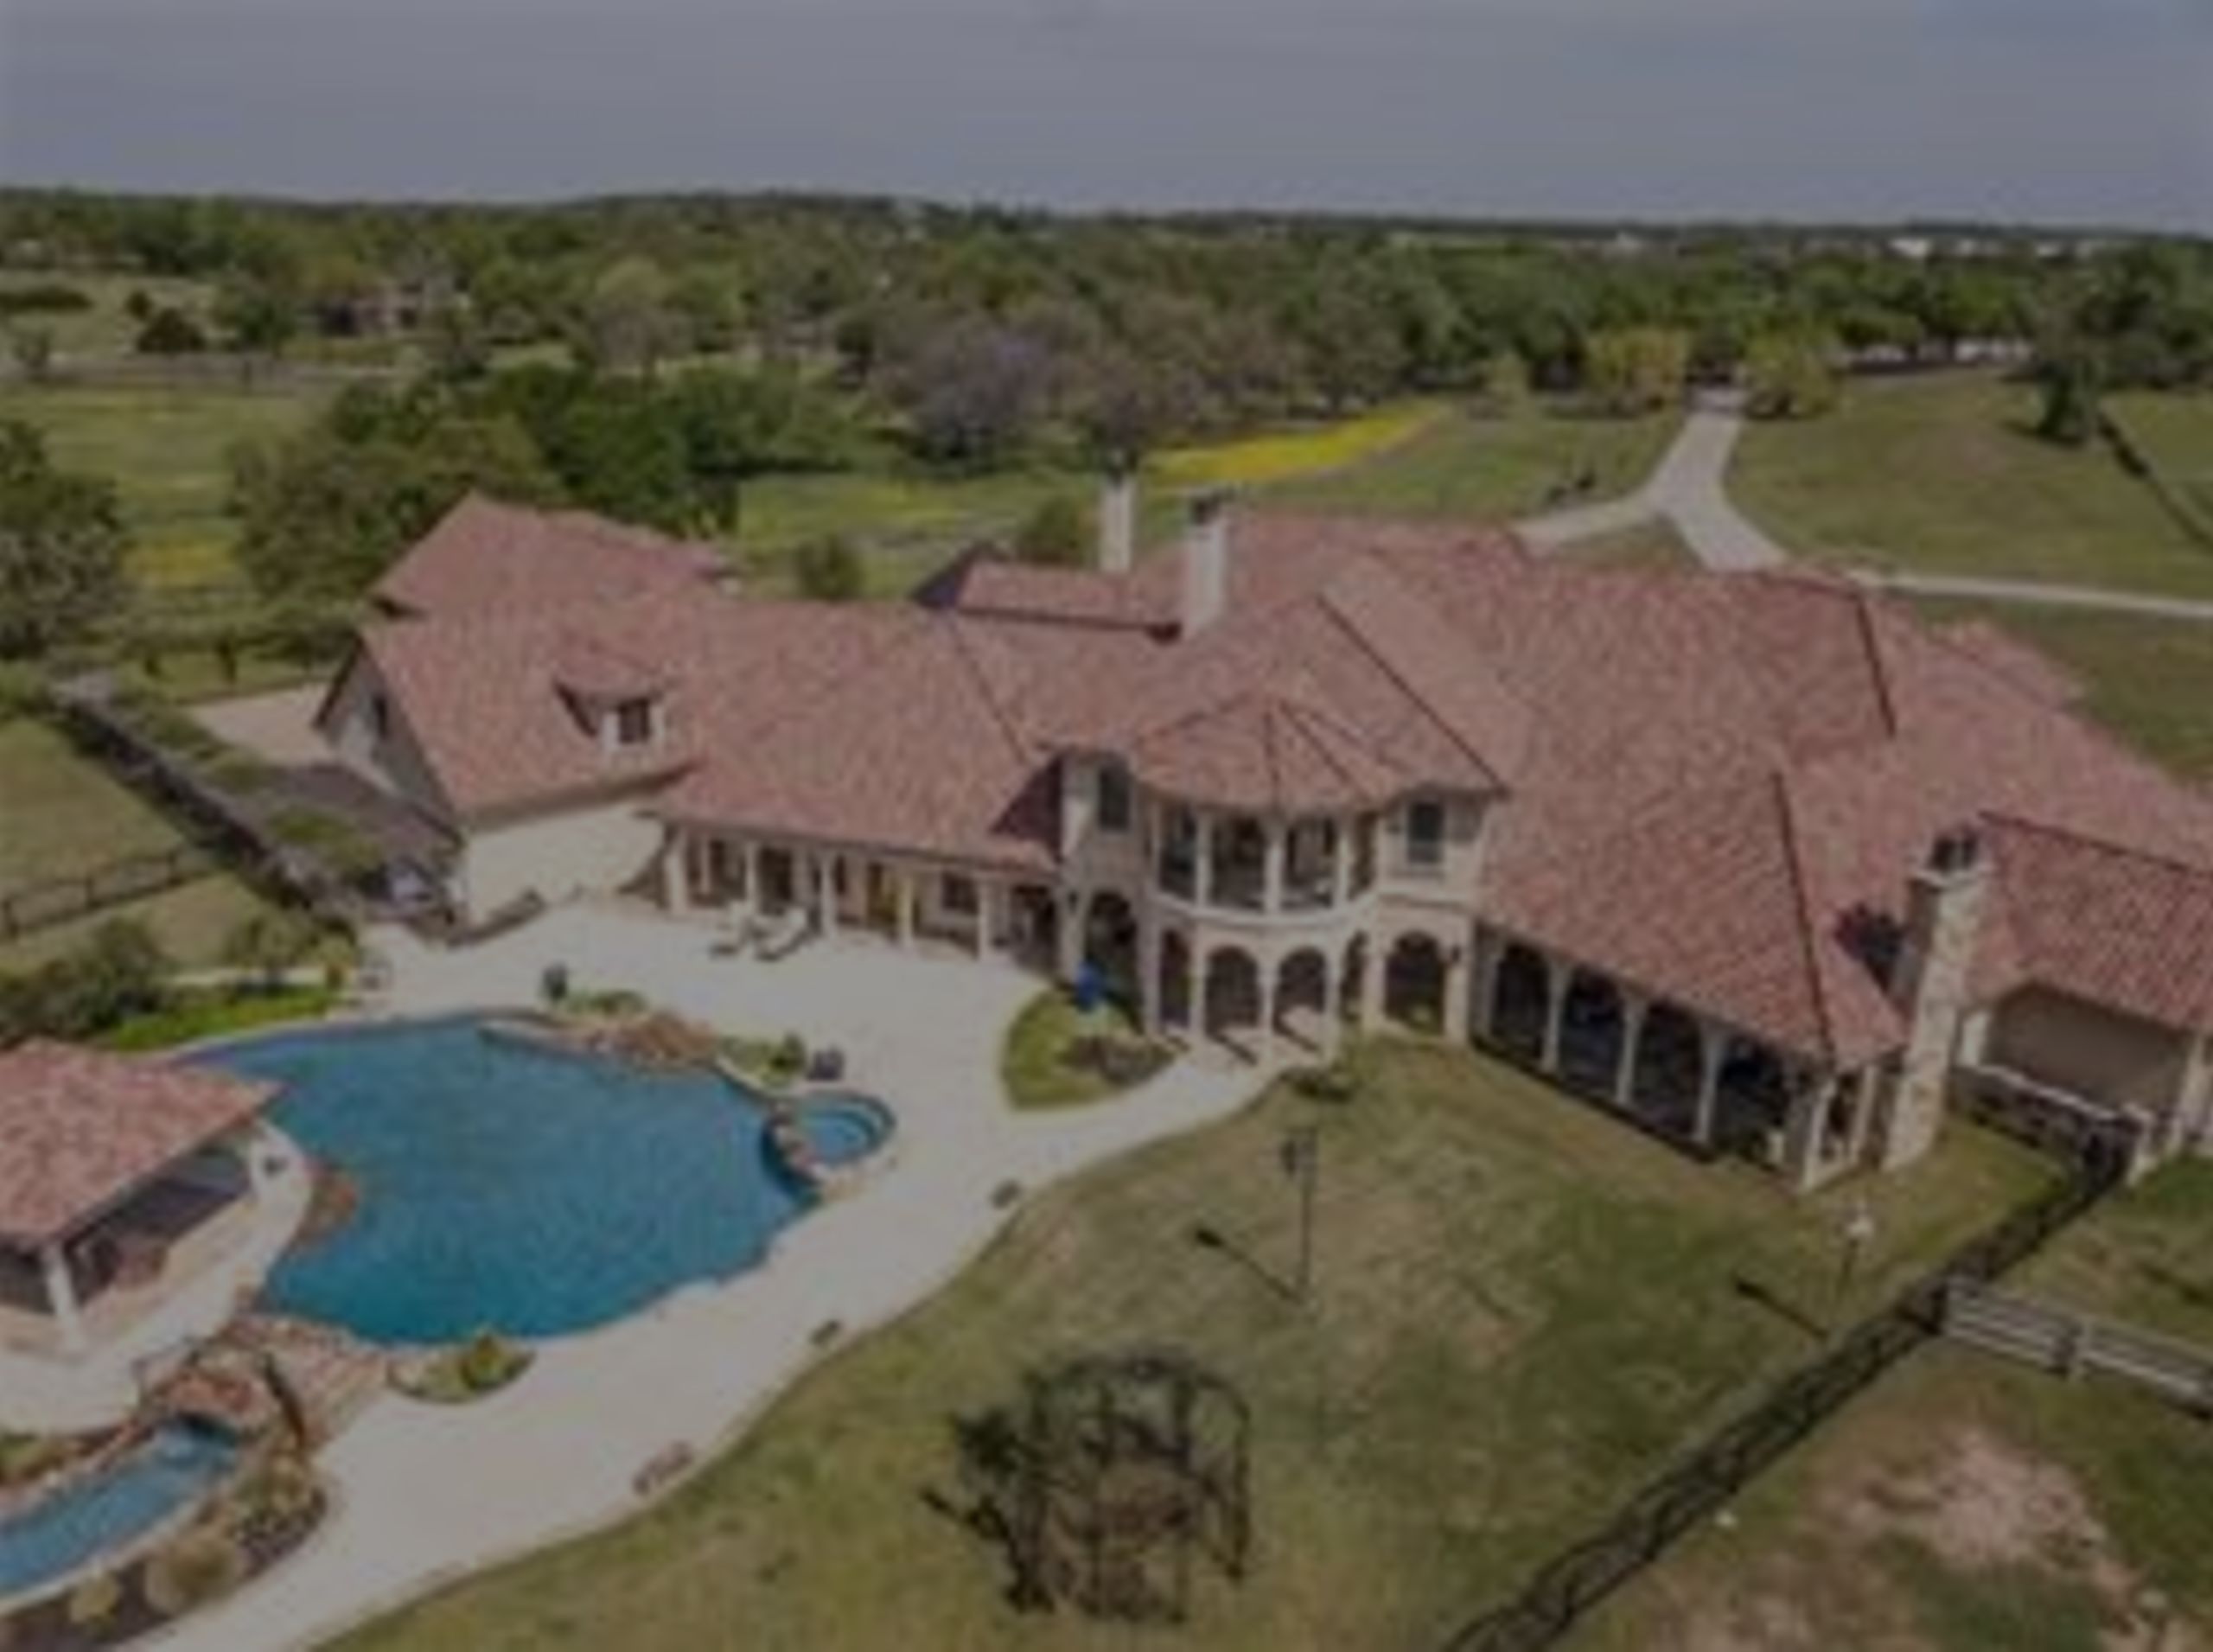 Price Reduced Home for Sale in Flower Mound!